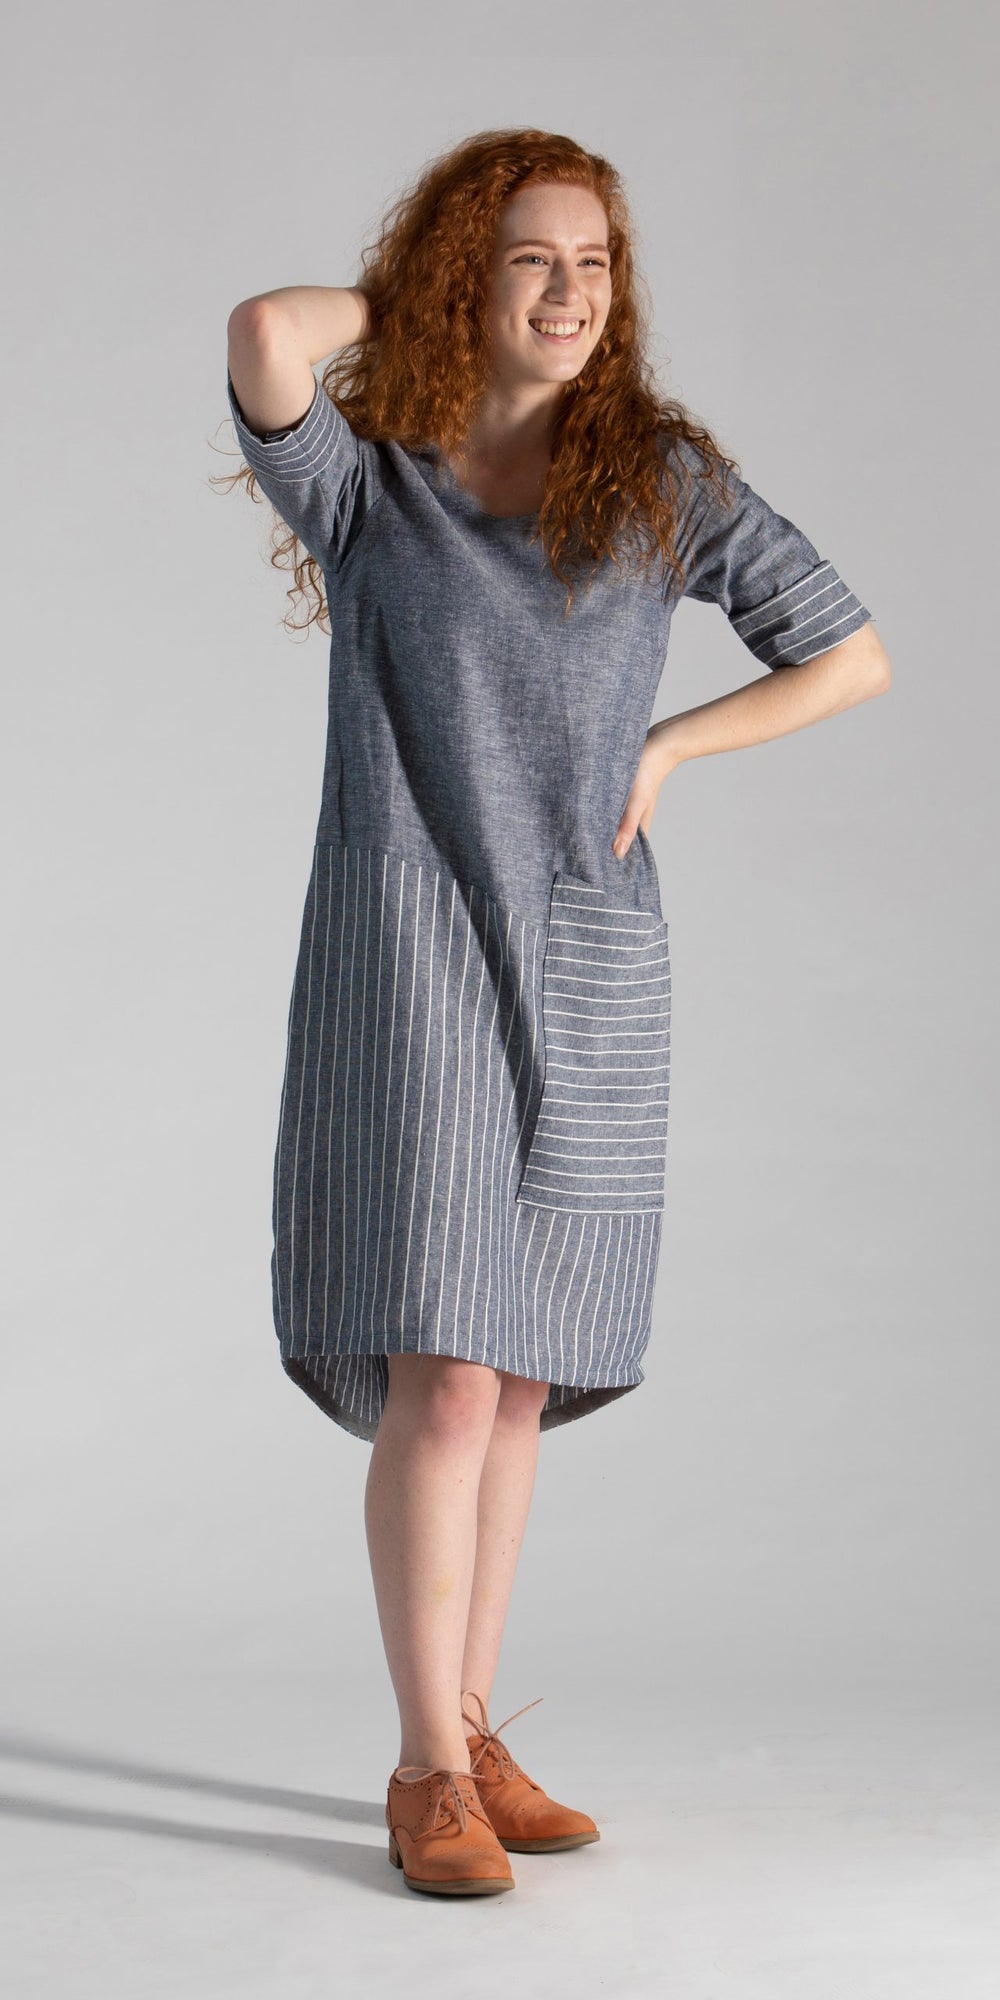 Women wearing the Eclipse Dress sewing pattern from Sew Different on The Fold Line. A dress pattern made in linen, cotton, cotton blends, lightweight wool, stable jersey, viscose, and chambray fabrics, featuring a loose-fit, bubble shape, front oversized 